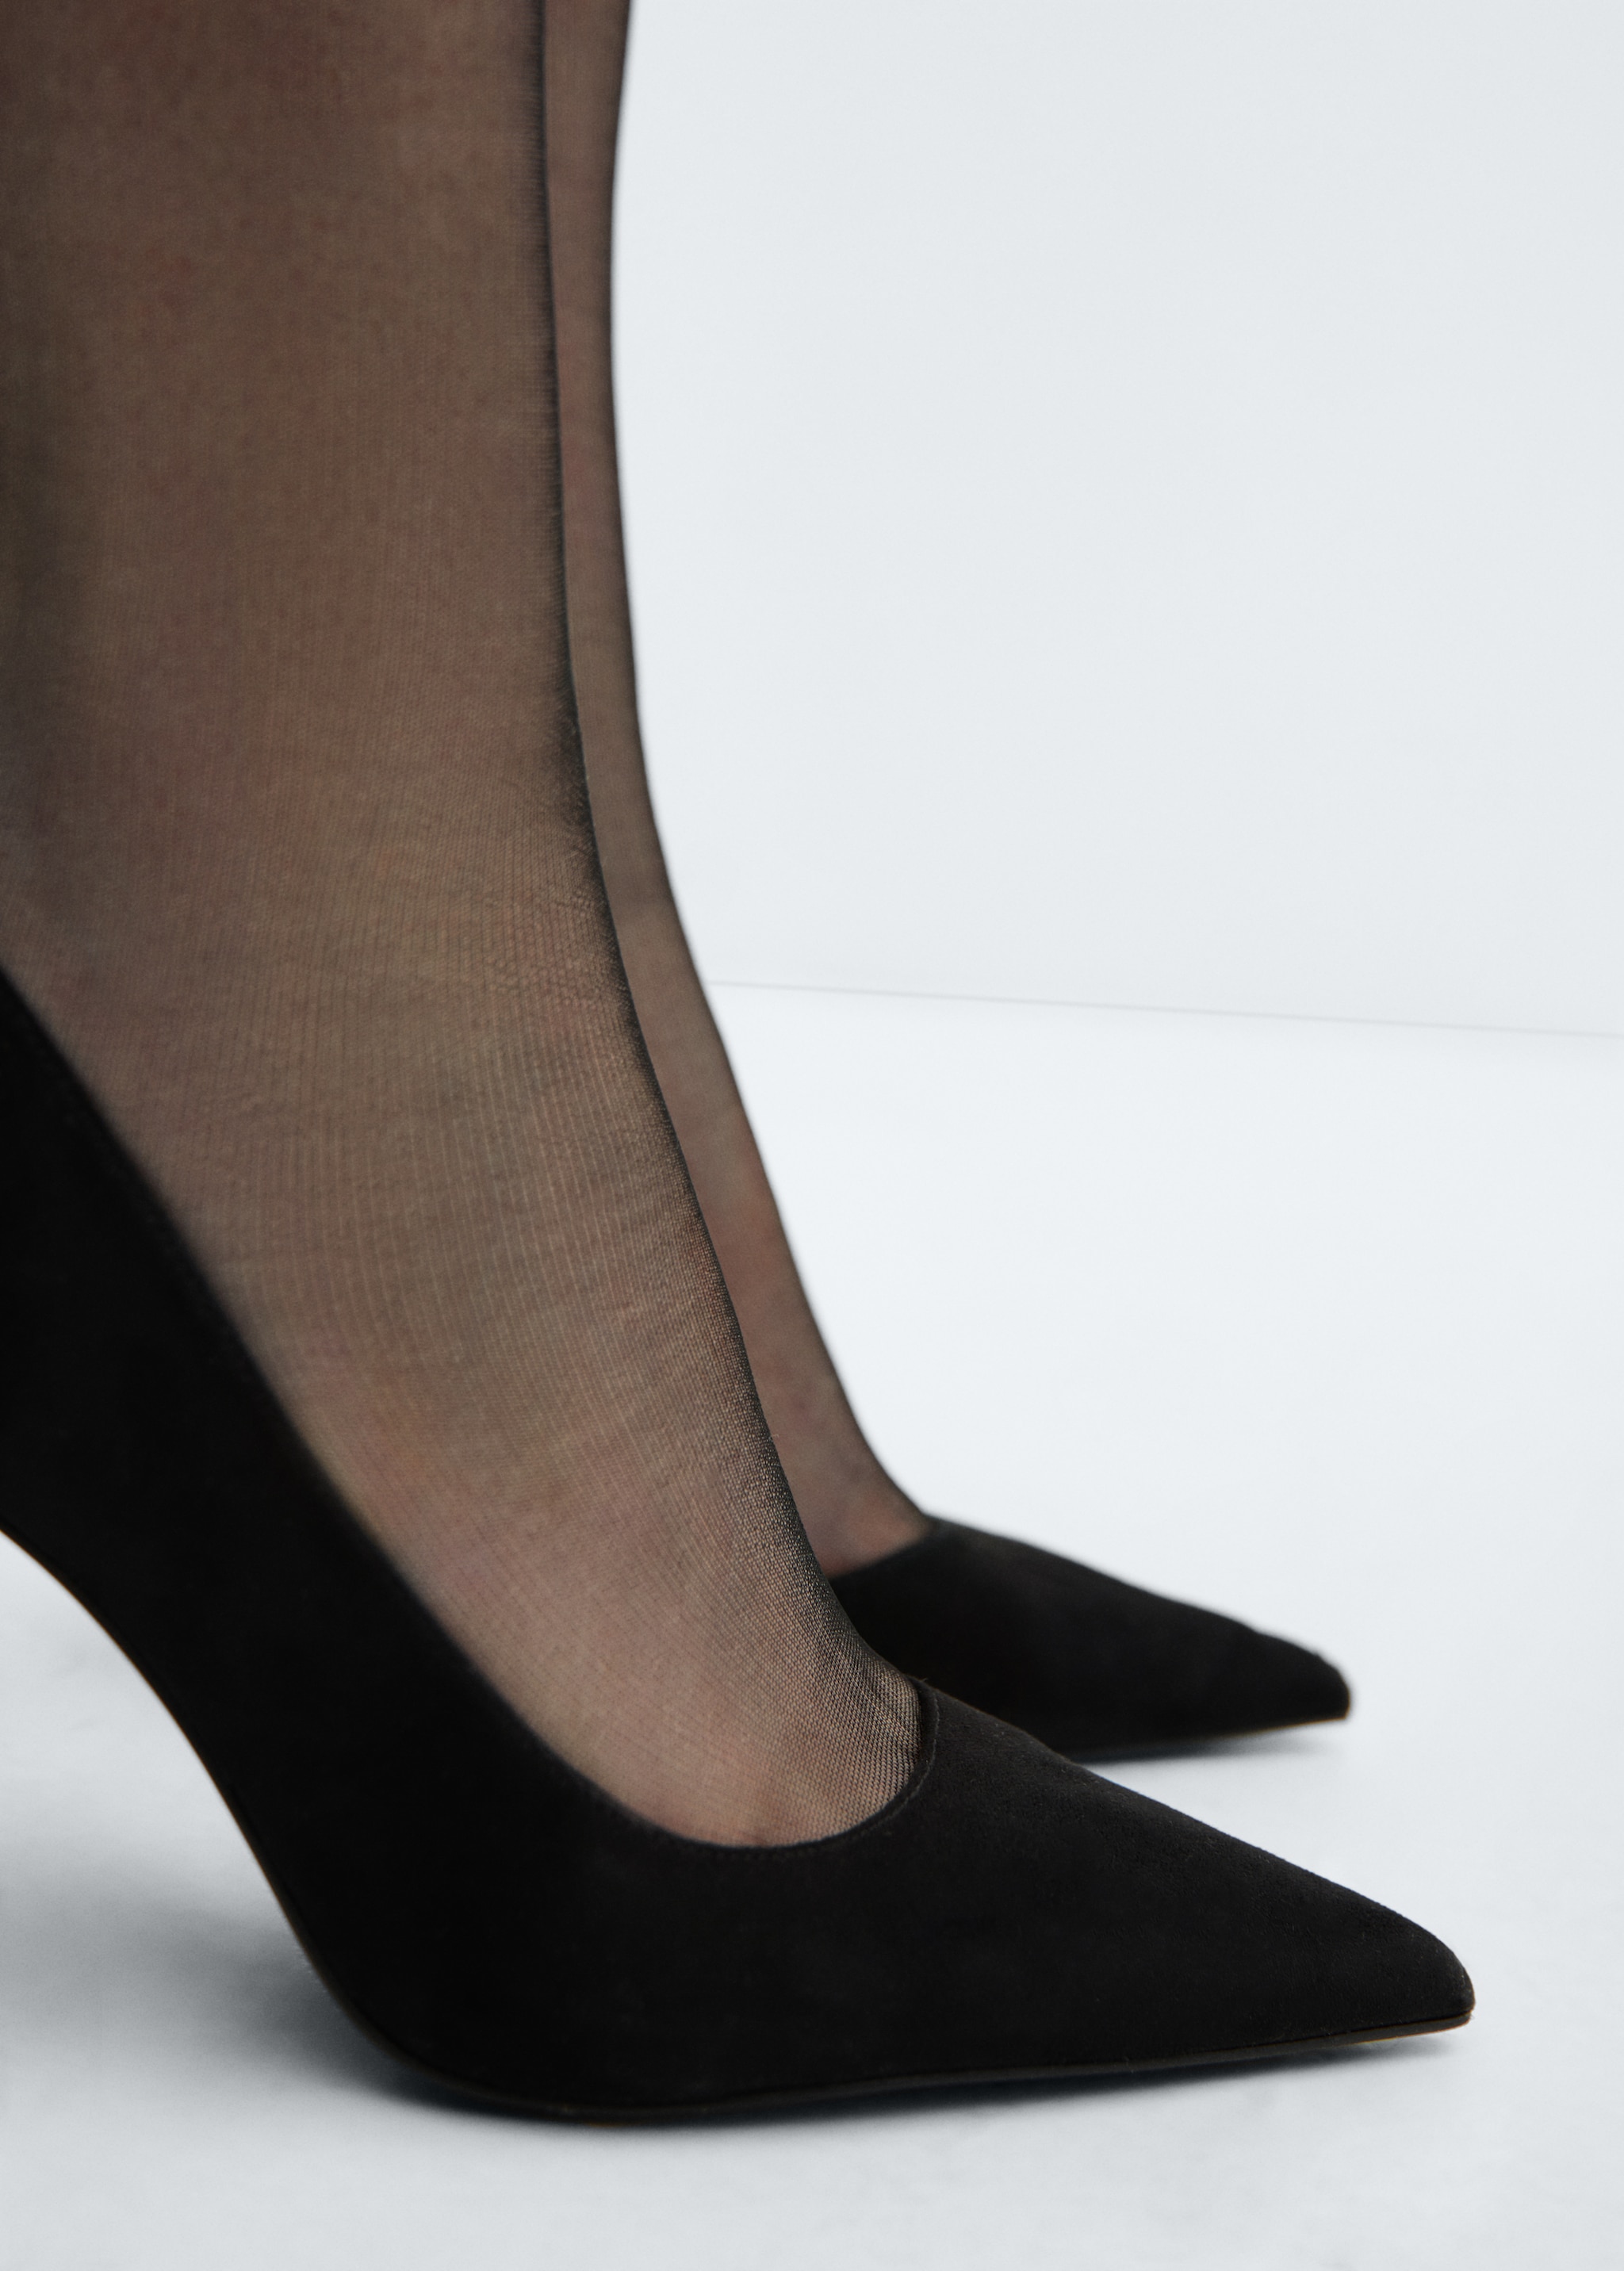 Asymmetrical heeled shoes - Details of the article 9